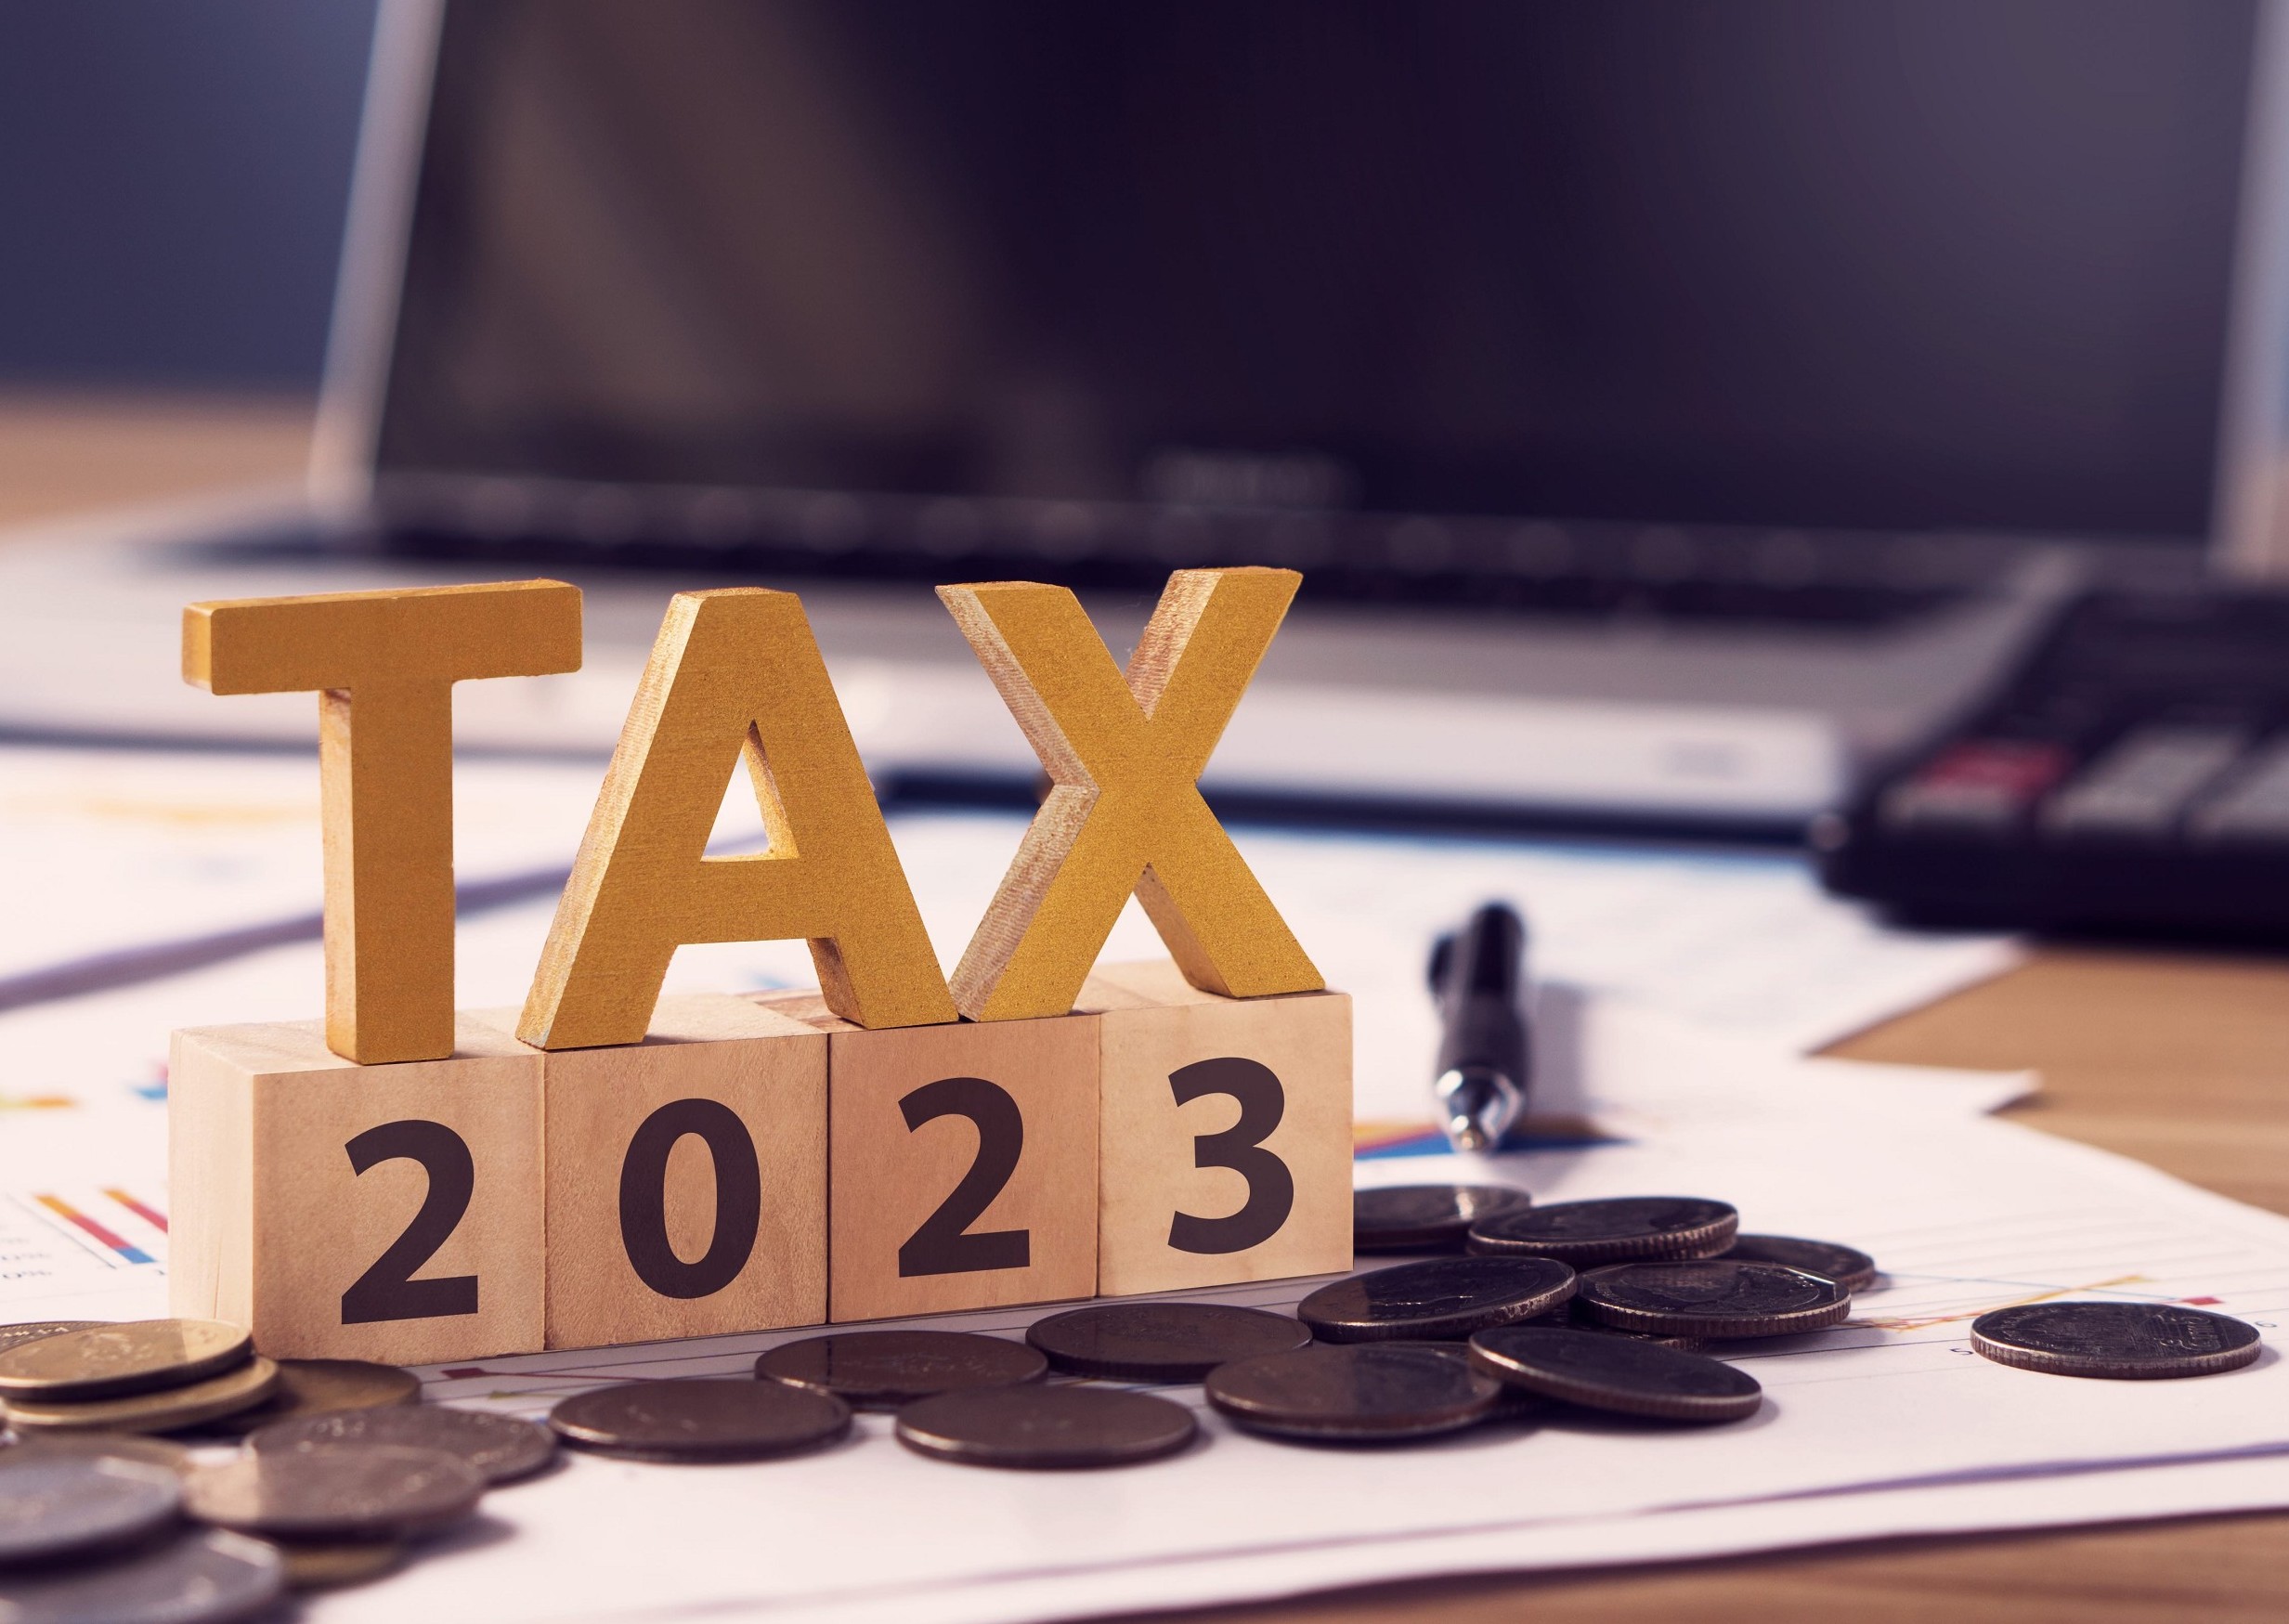 Important new achievements remain regarding tax reform, many actions envisaged and when this will be done